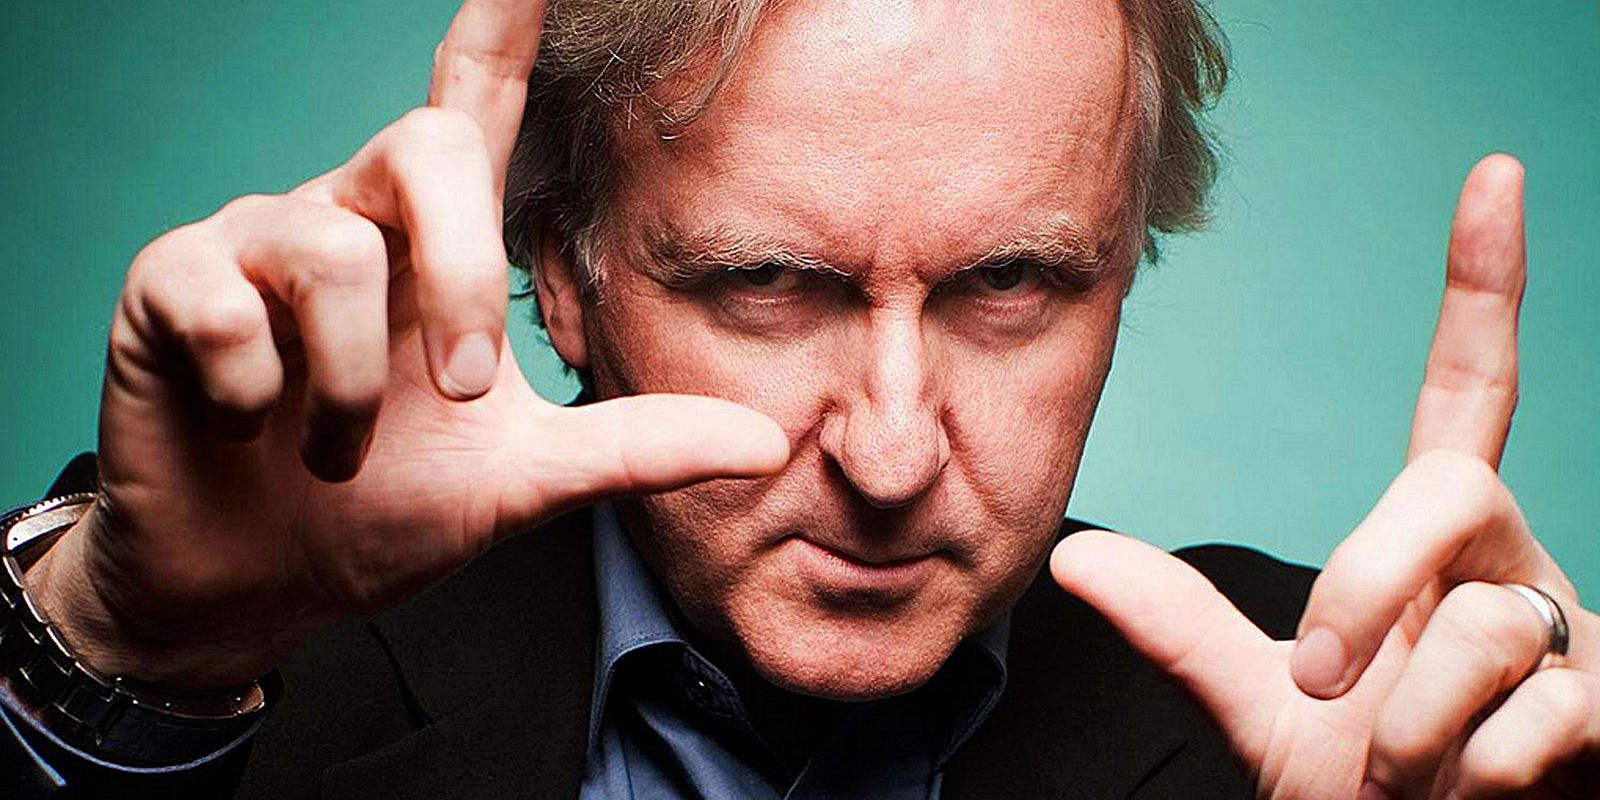 James Cameron looking into camera and framing it with his hands